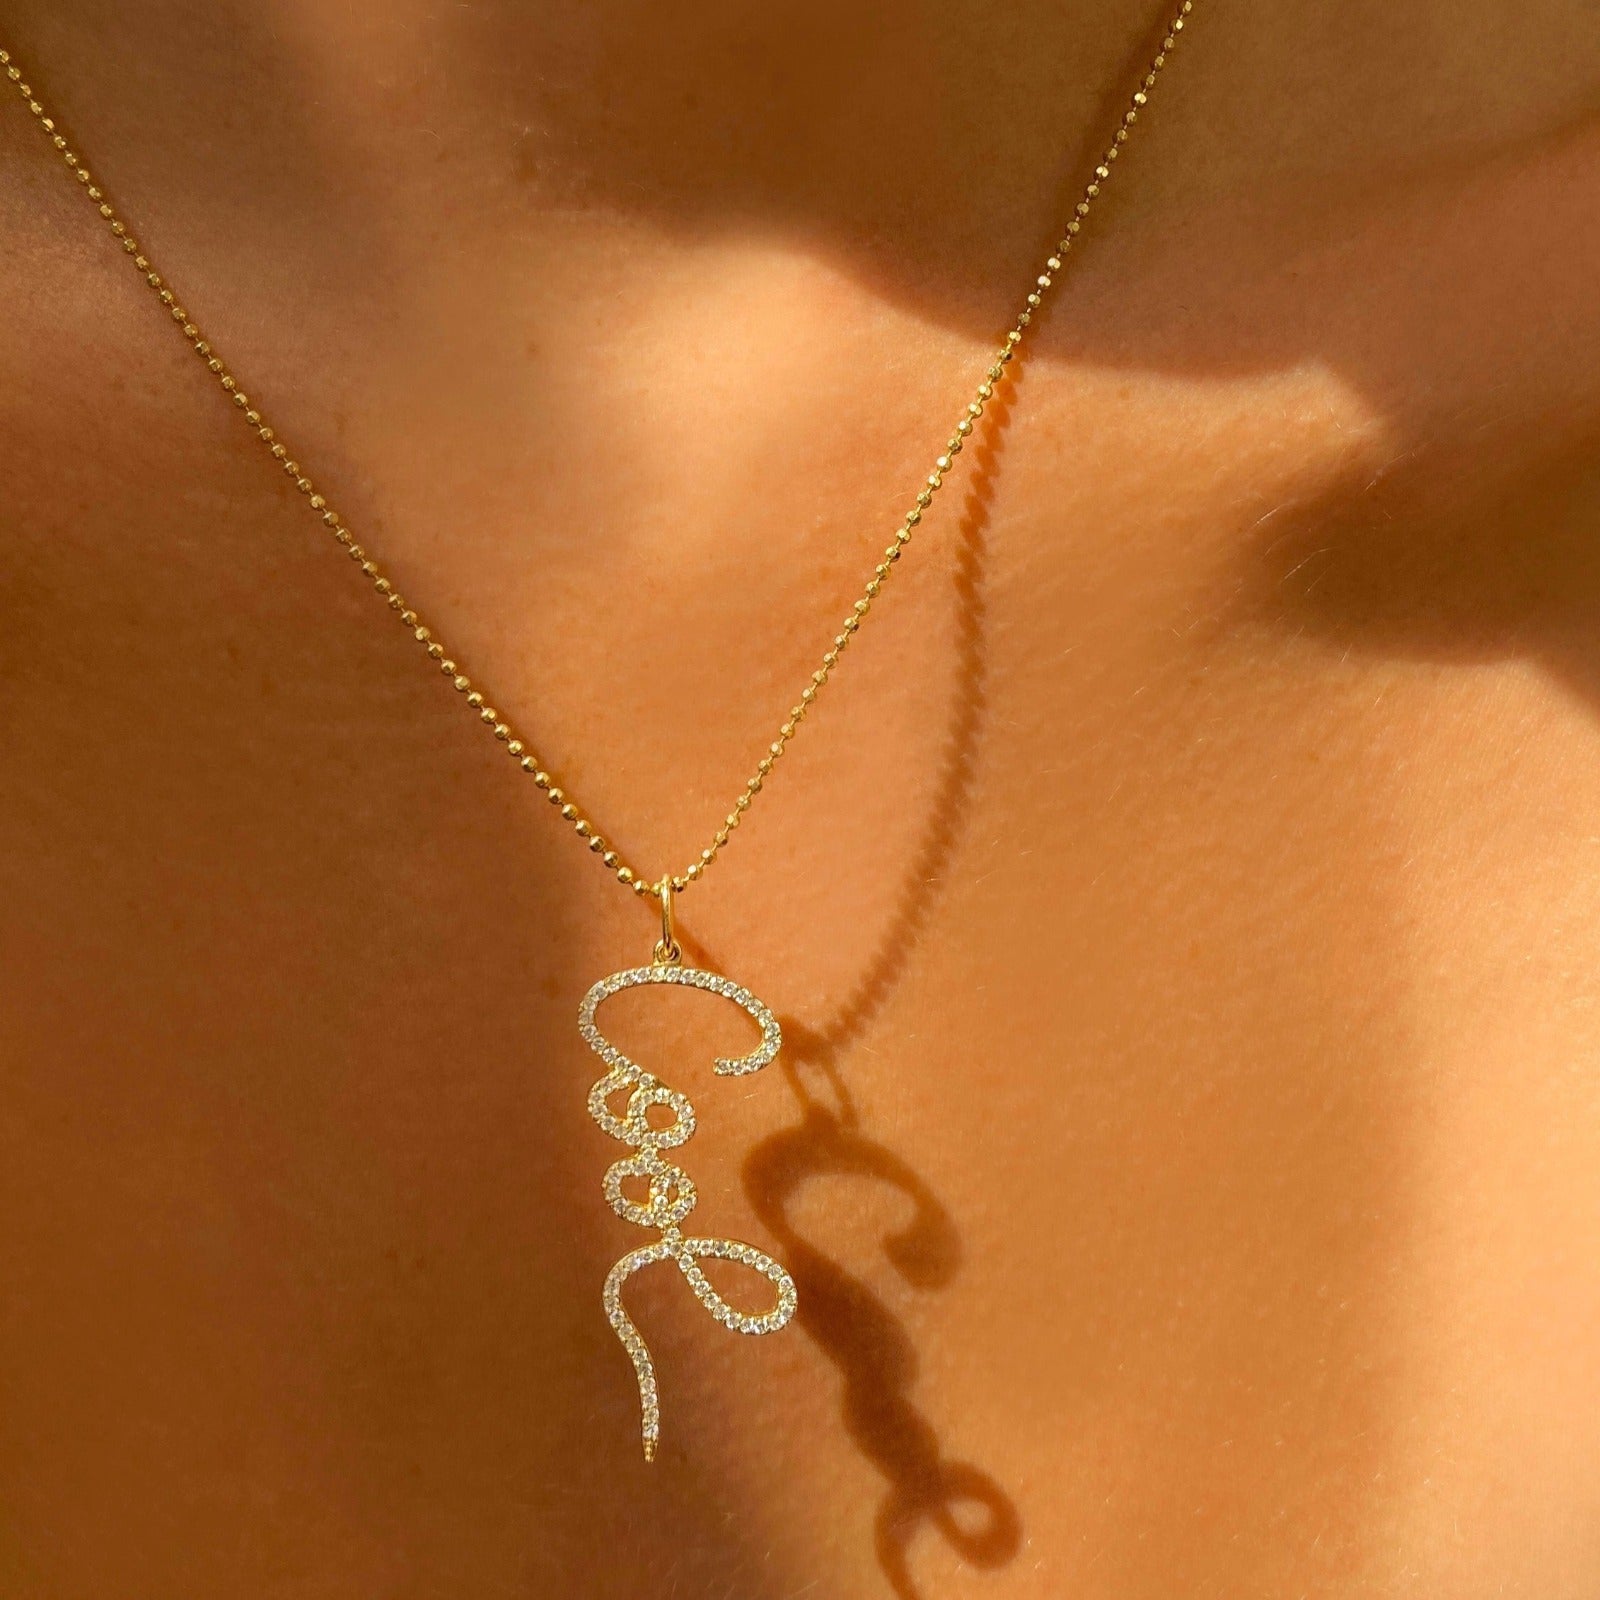 14k gold Pavé Graffiti 'Cool' Charm. Styled on a neck hanging from a diamond cut bead chain necklace